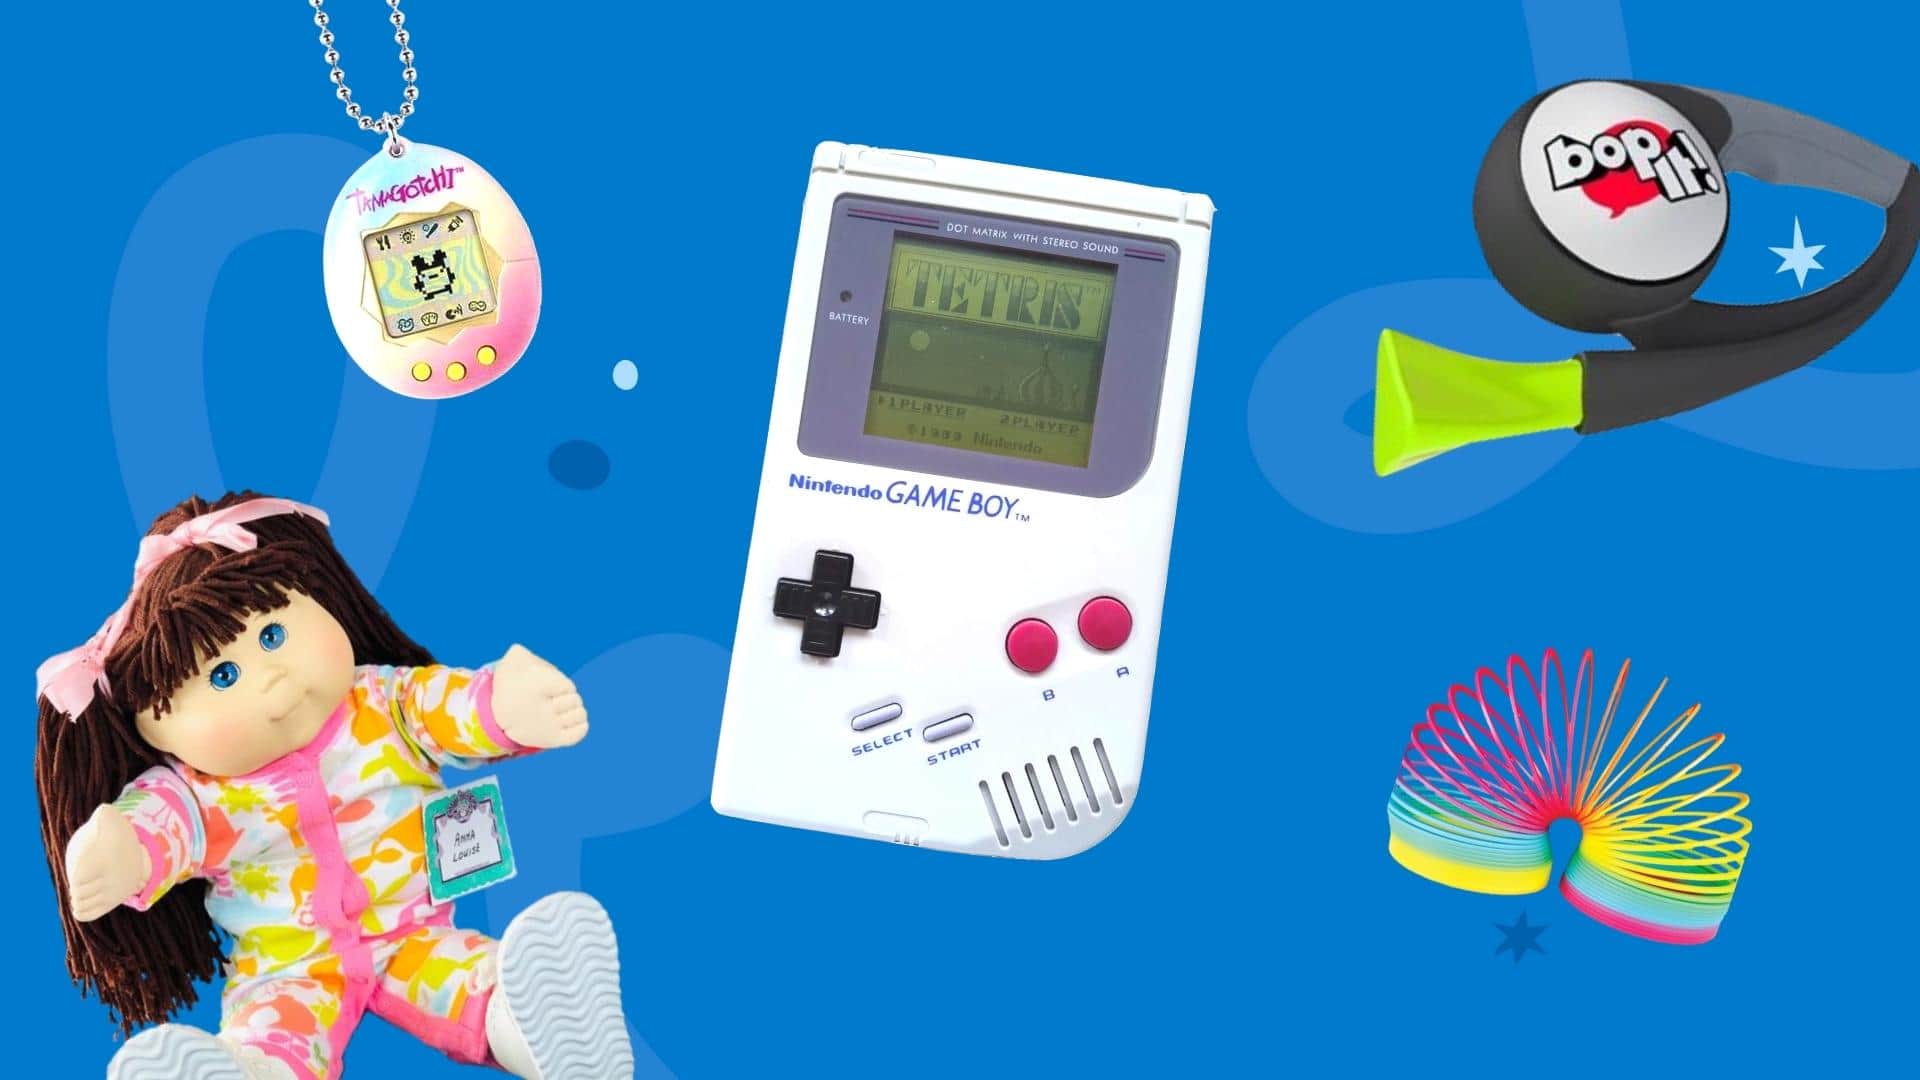 A blue graphic with a range of nostalgic 90s toys - a cabbage patch doll with brown hair and rainbow pyjamas, a rainbow coloured Tamagotchi toy, and grey Game Boy displaying a Tetris game on the screen, a Bop It toy and a rainbow coloured plastic slinky toy.